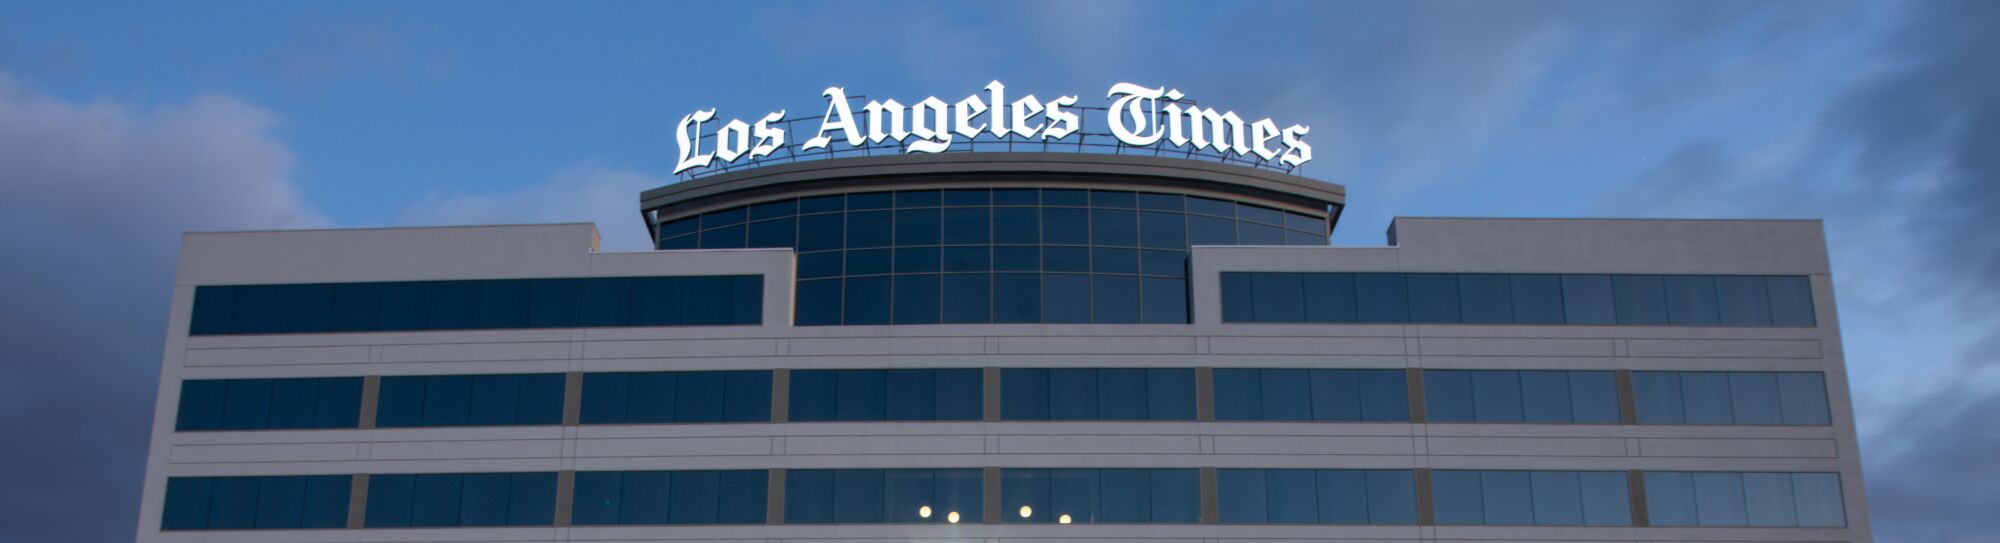 The Los Angeles Times building  along Imperial Highway on Friday, April 17, 2020